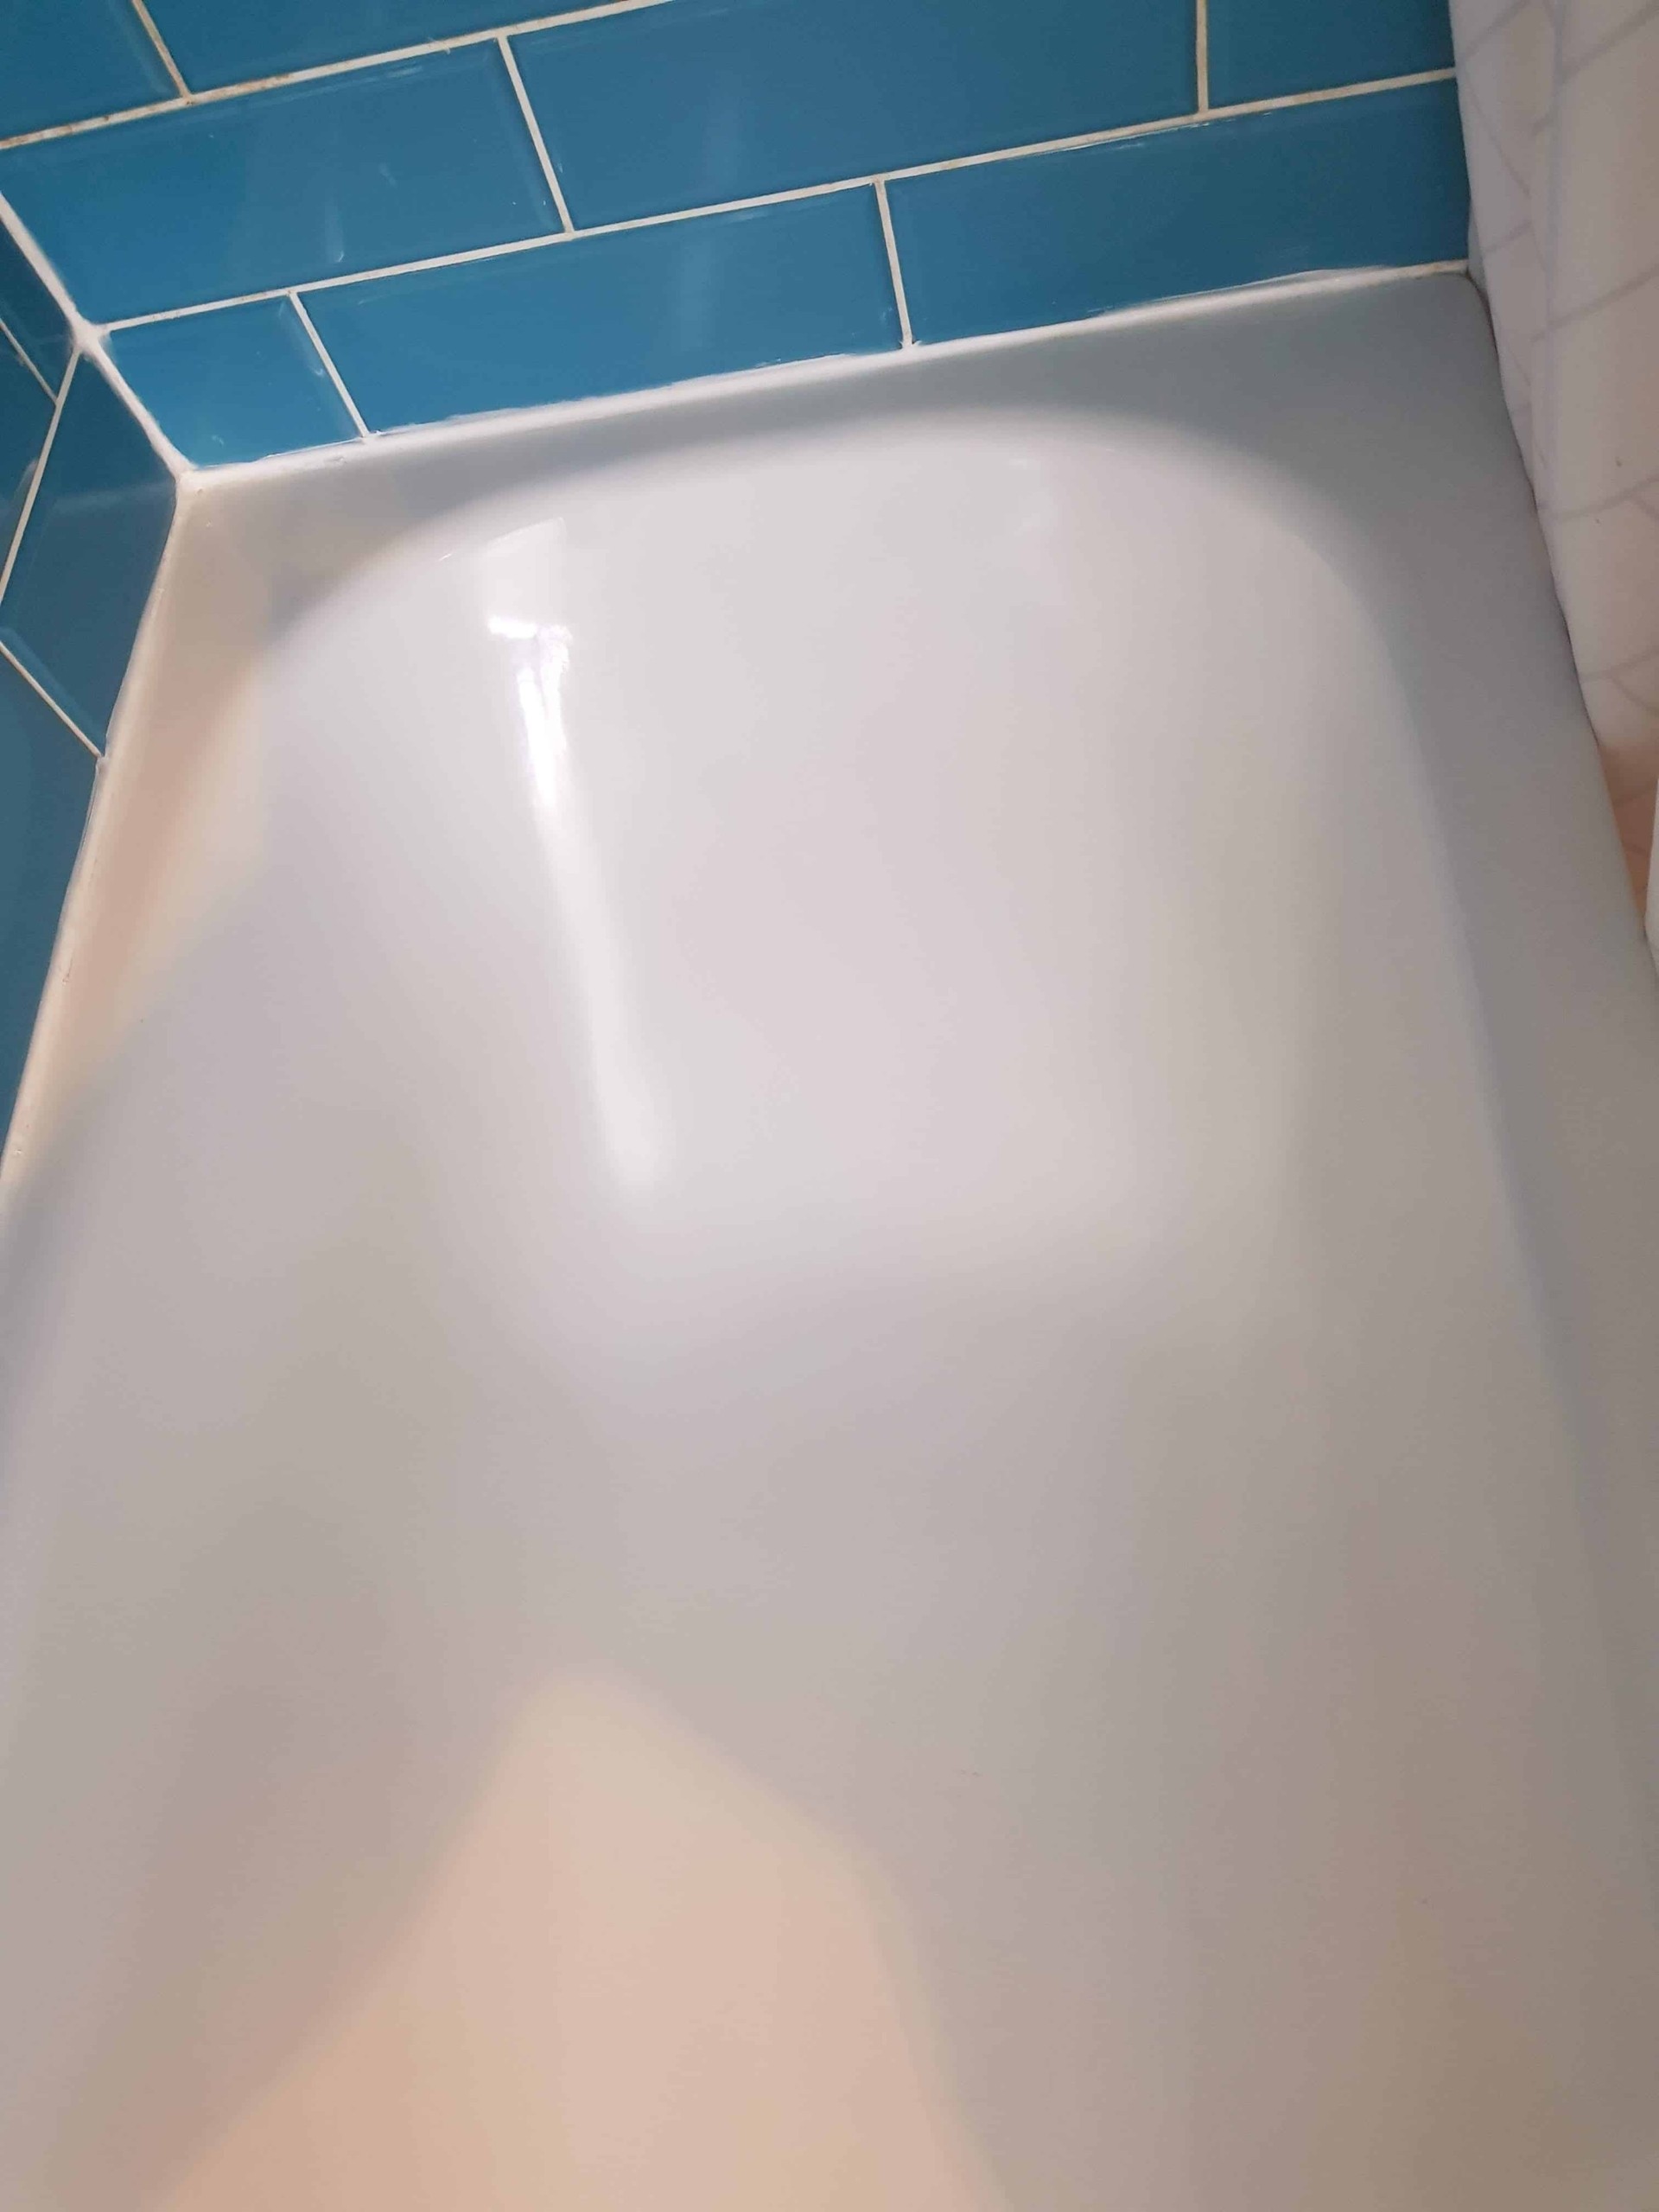 5 examples of time and cost effective bath enamel repair. 21